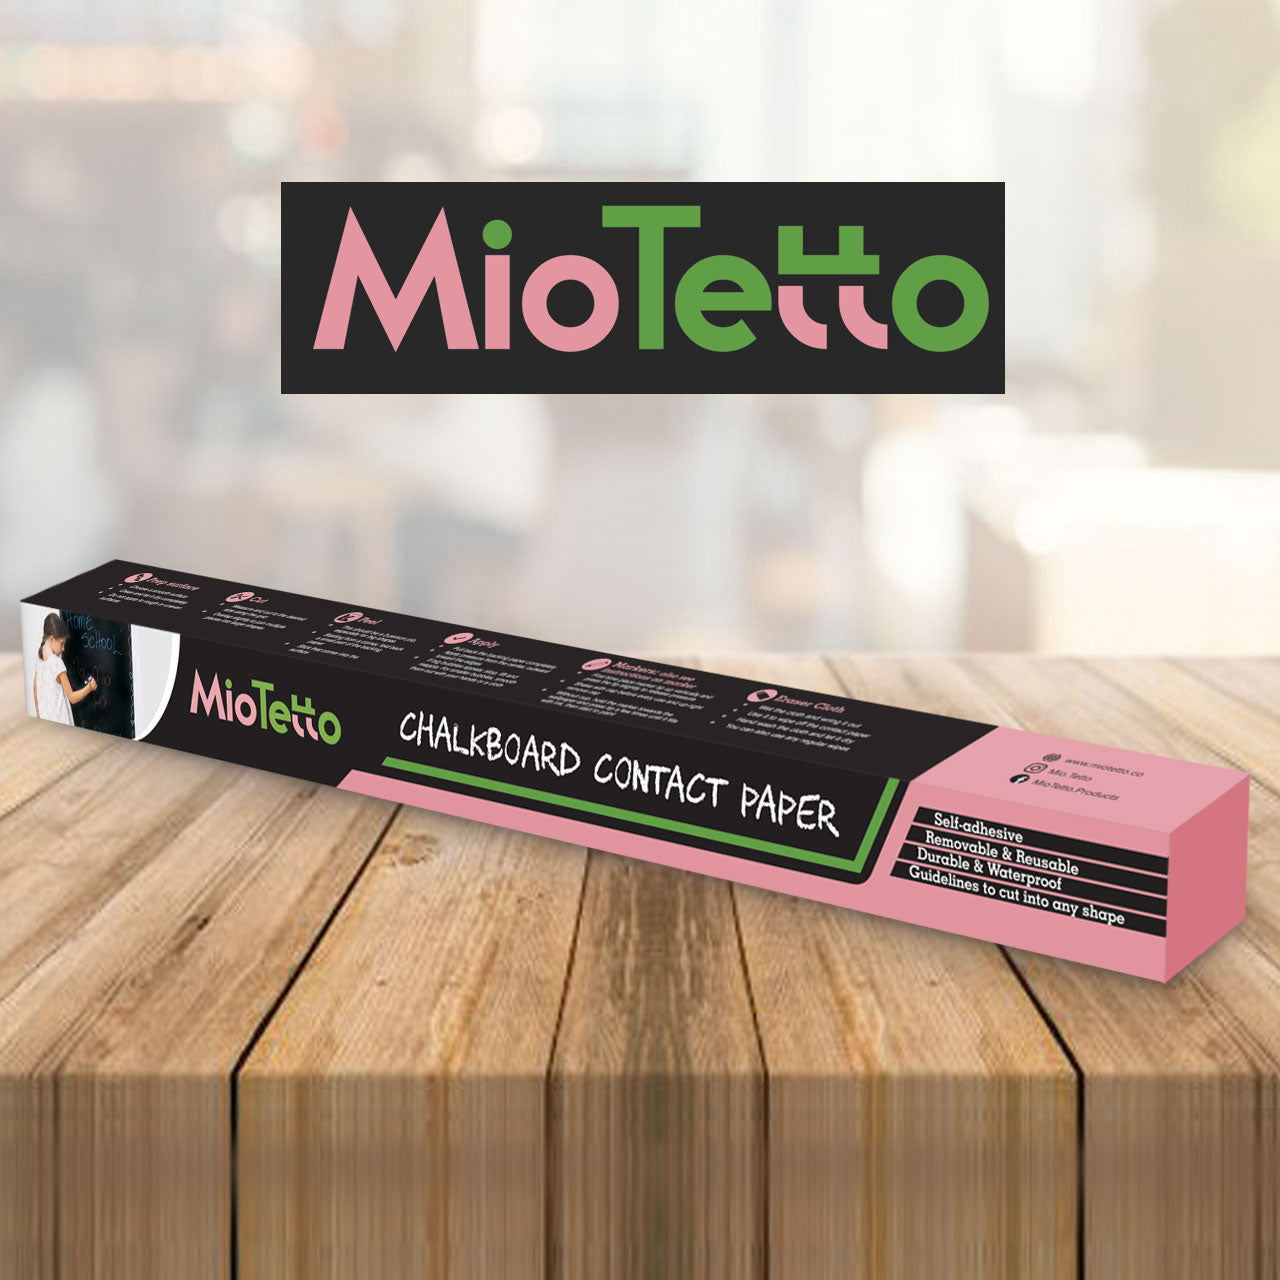 MioTetto Chalkboard Paper  Large Size + Markers & Eraser